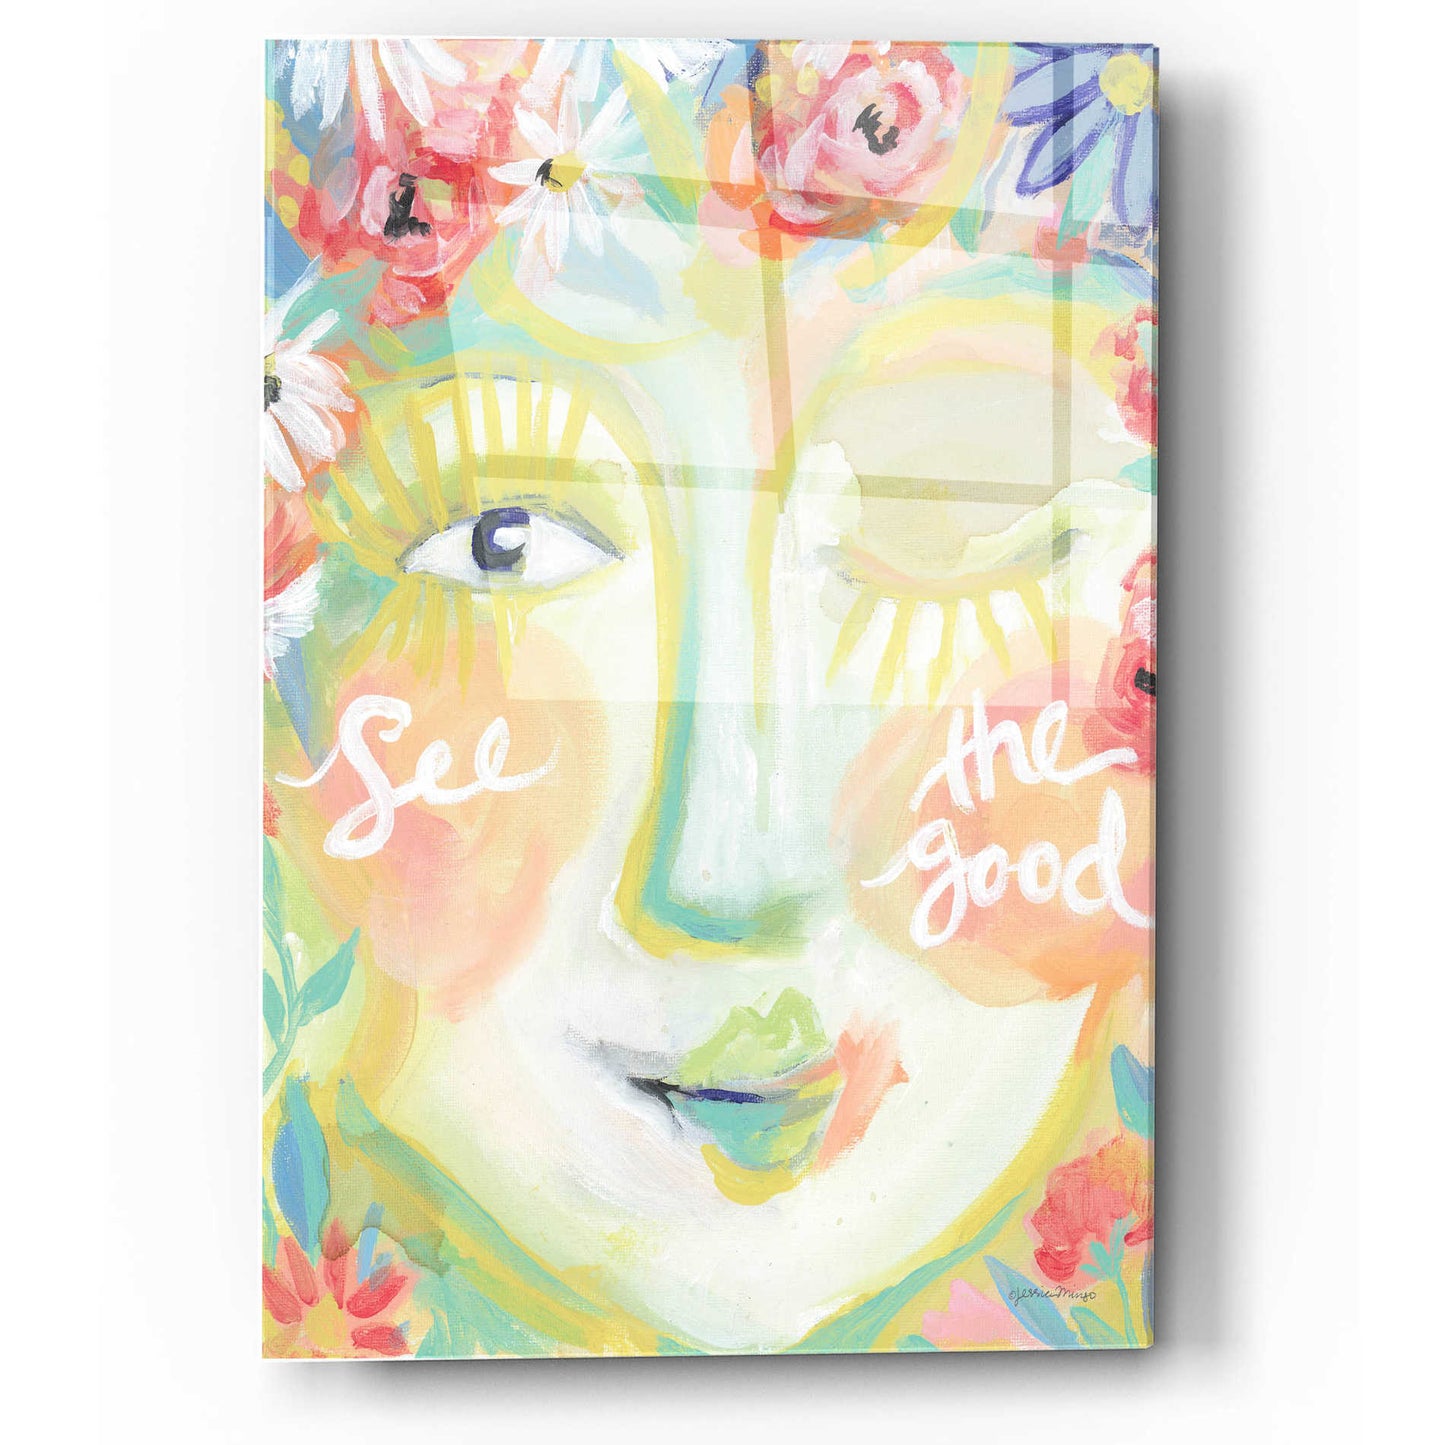 Epic Art 'See the Good' by Jessica Mingo, Acrylic Glass Wall Art,12x16